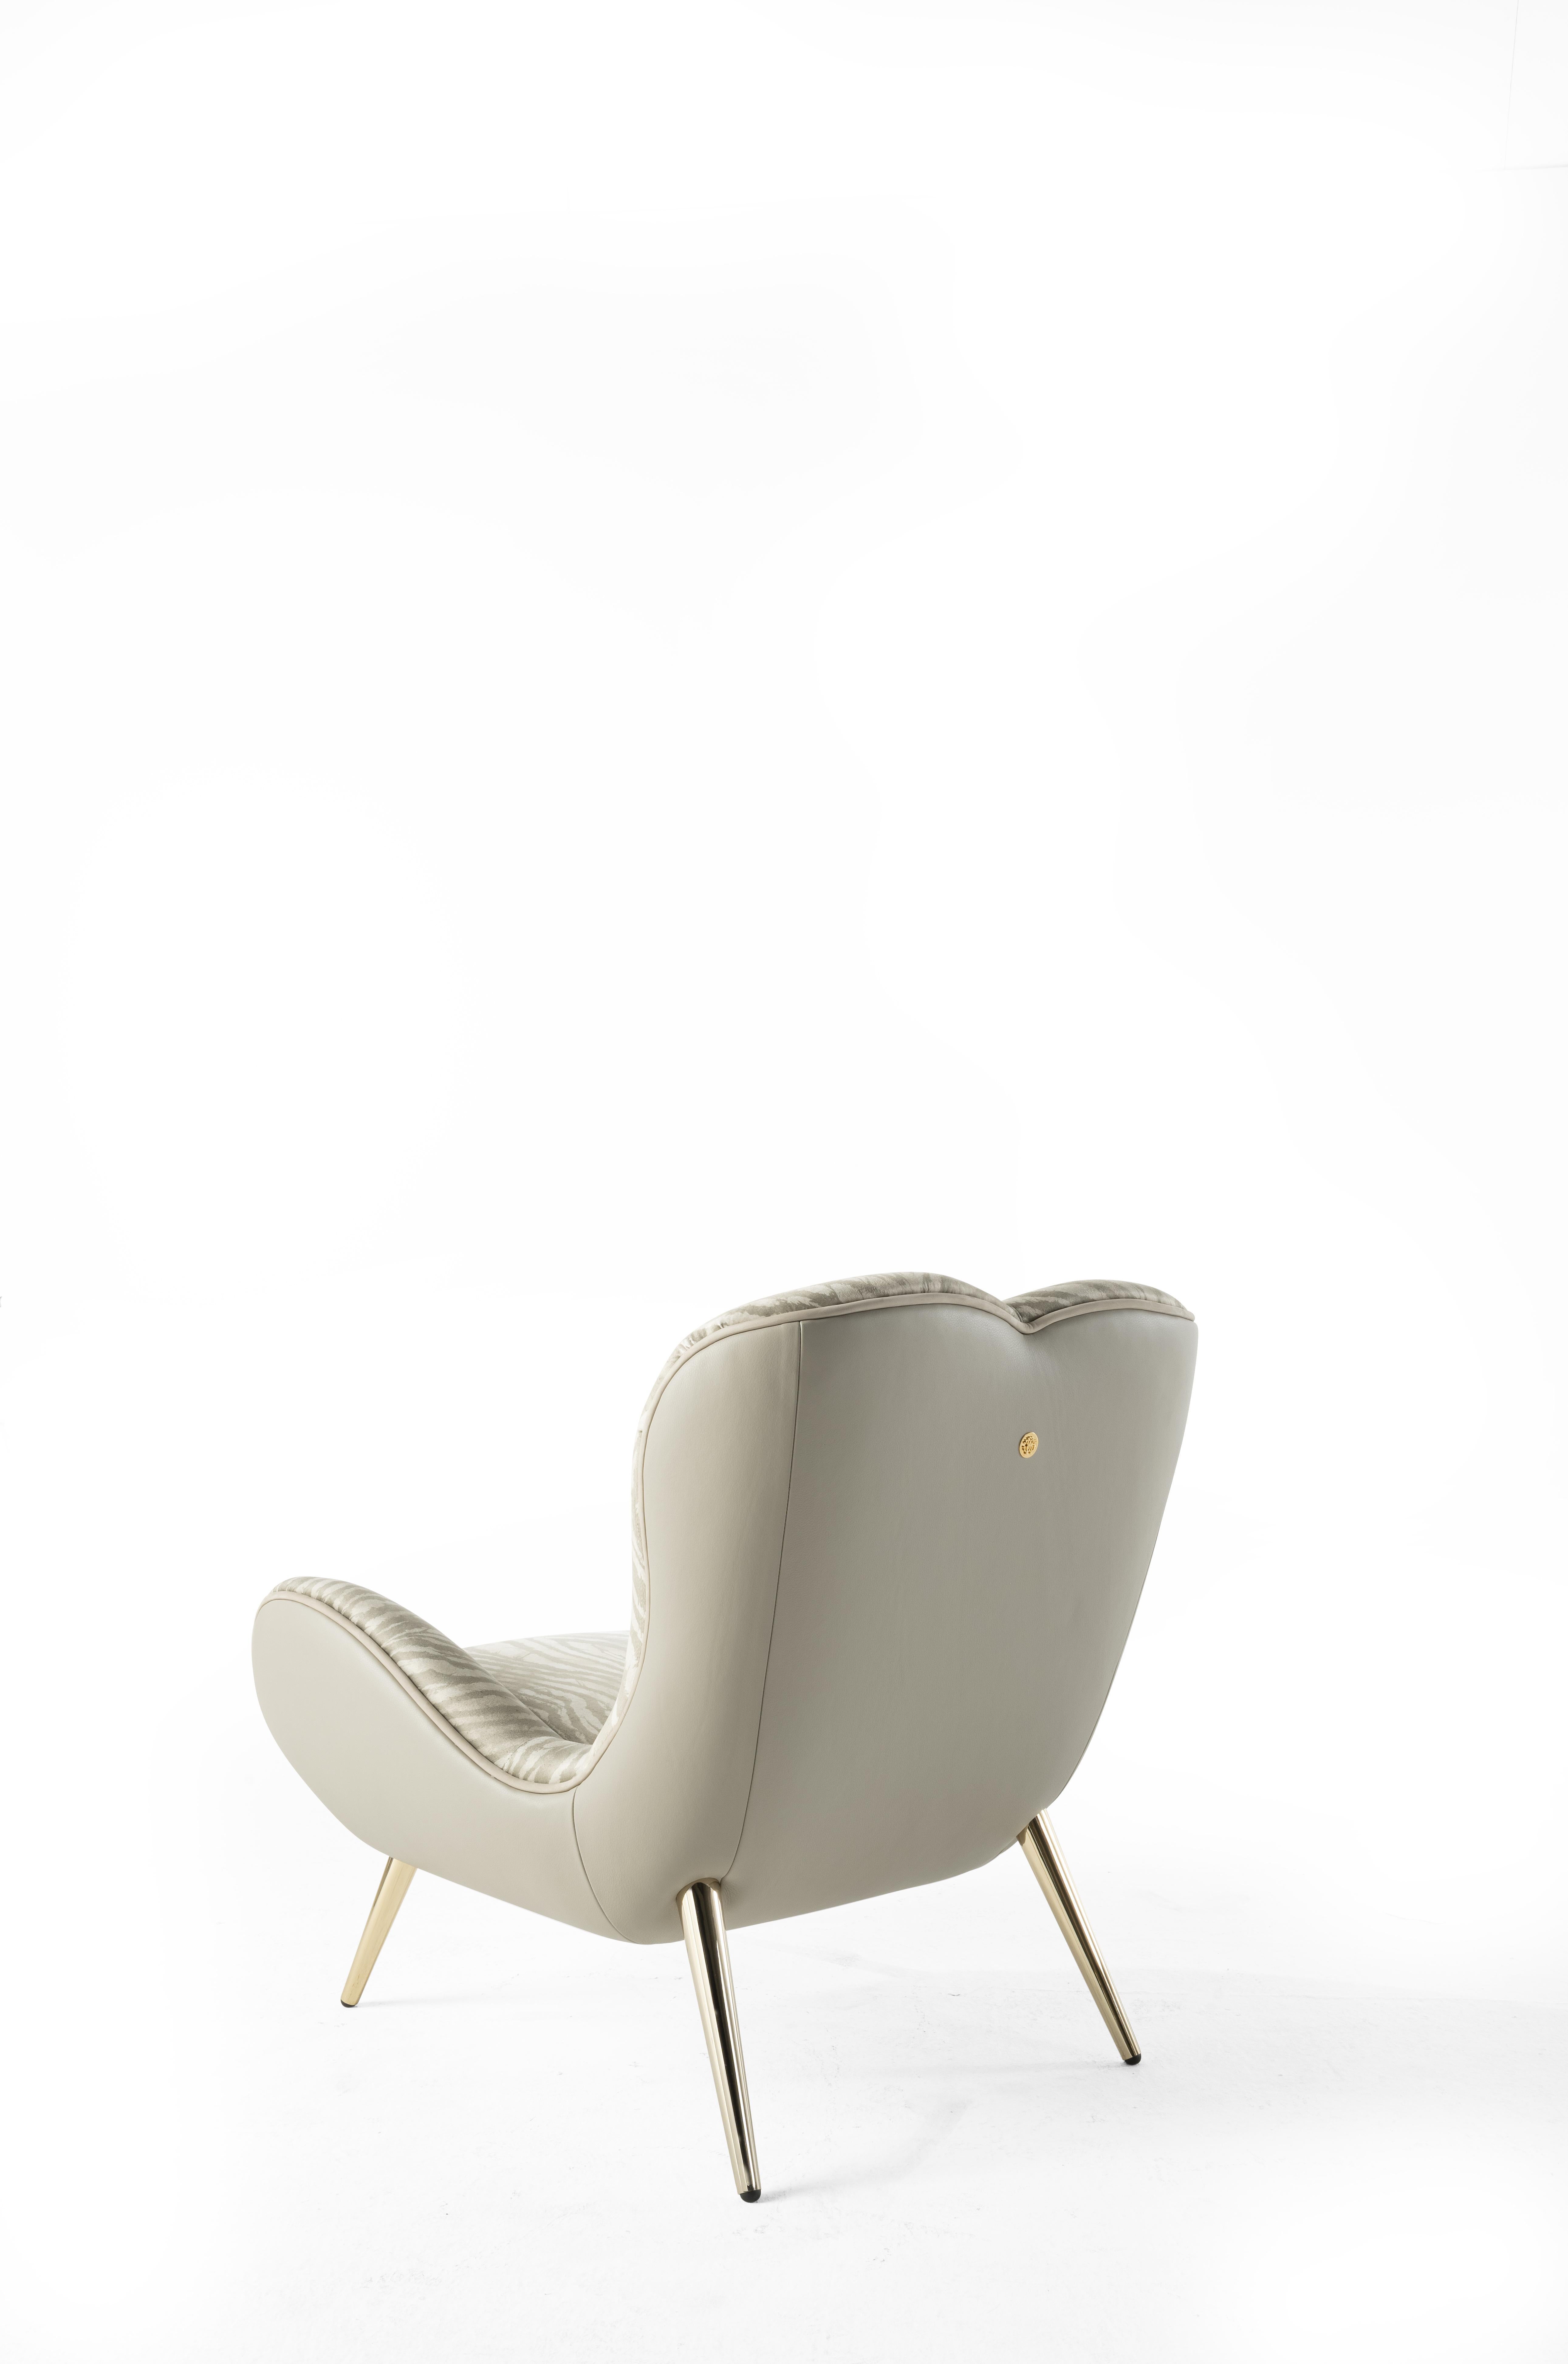 Italian 21st Century Tifnit Armchair in Leather by Roberto Cavalli Home Interiors For Sale